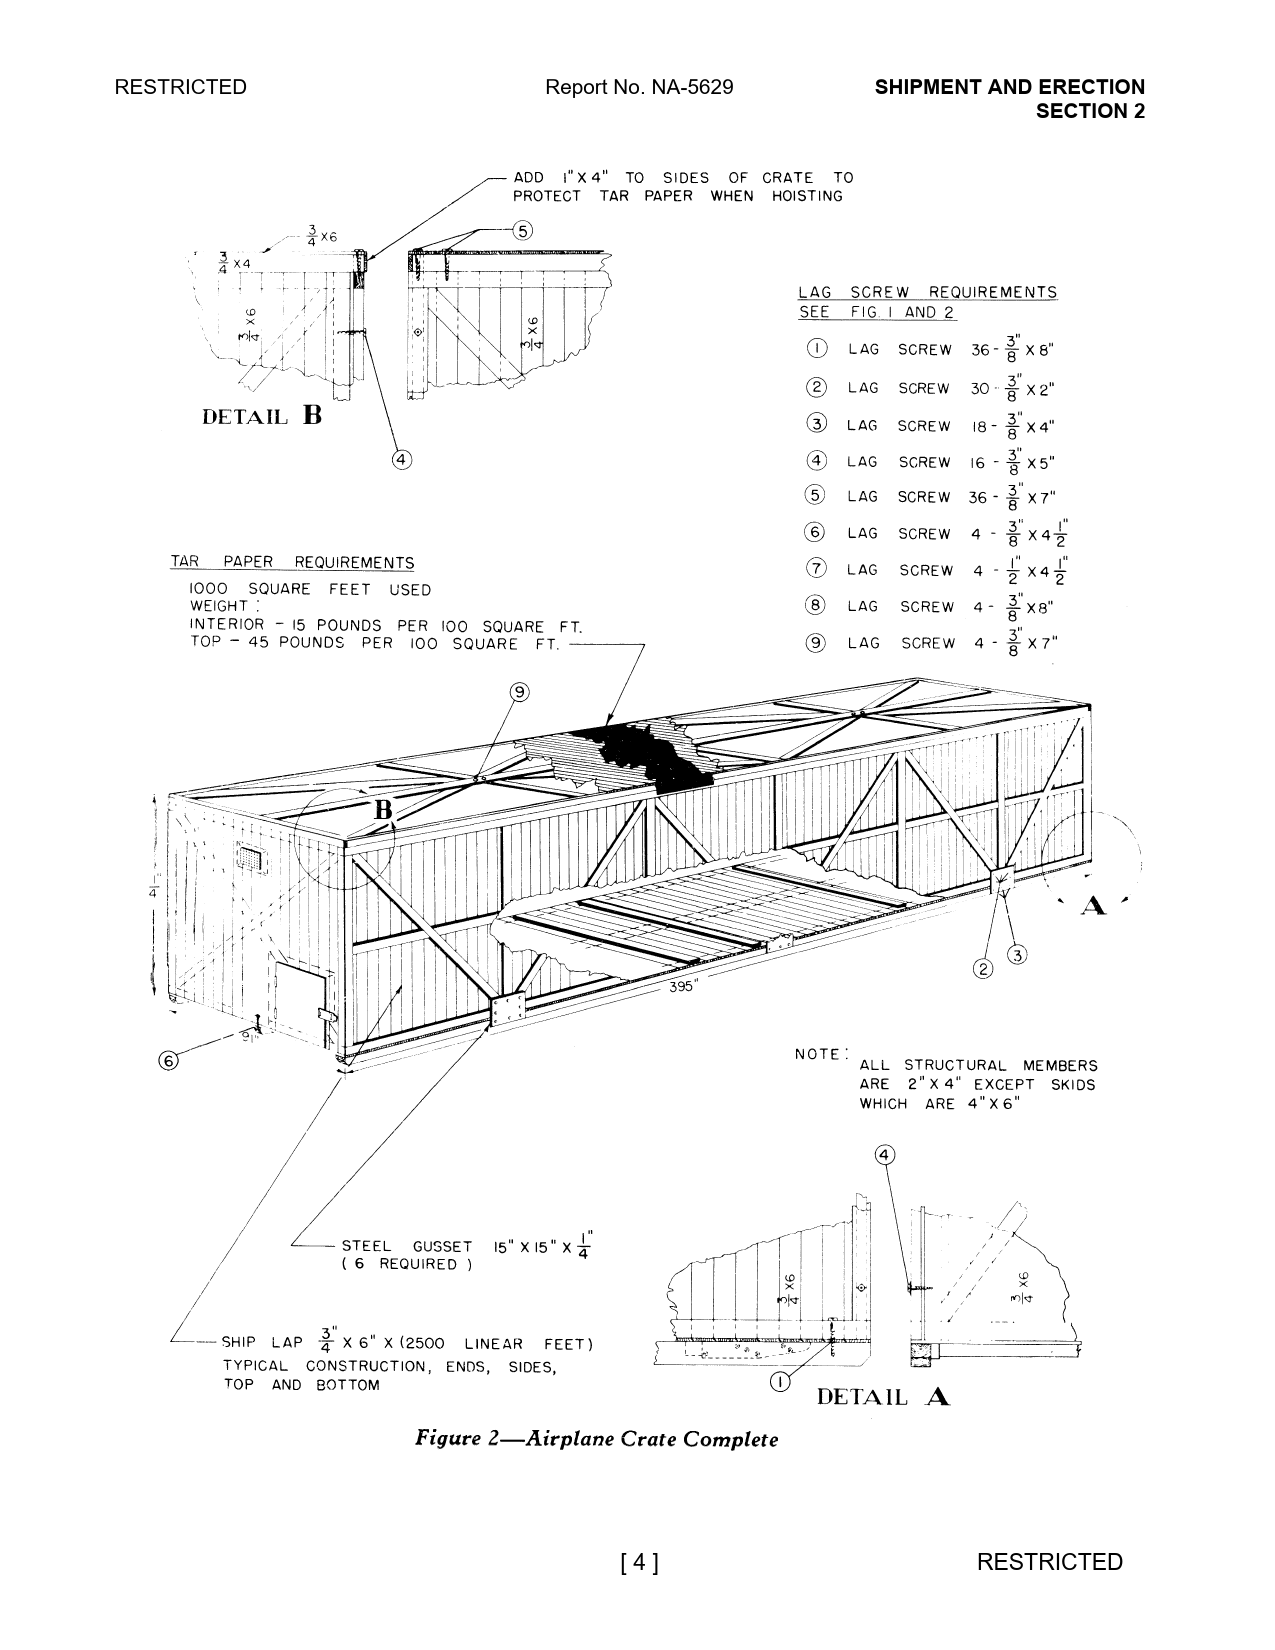 Sample page 18 from AirCorps Library document: Manual of Instructions for the Maintenance of the P-51A